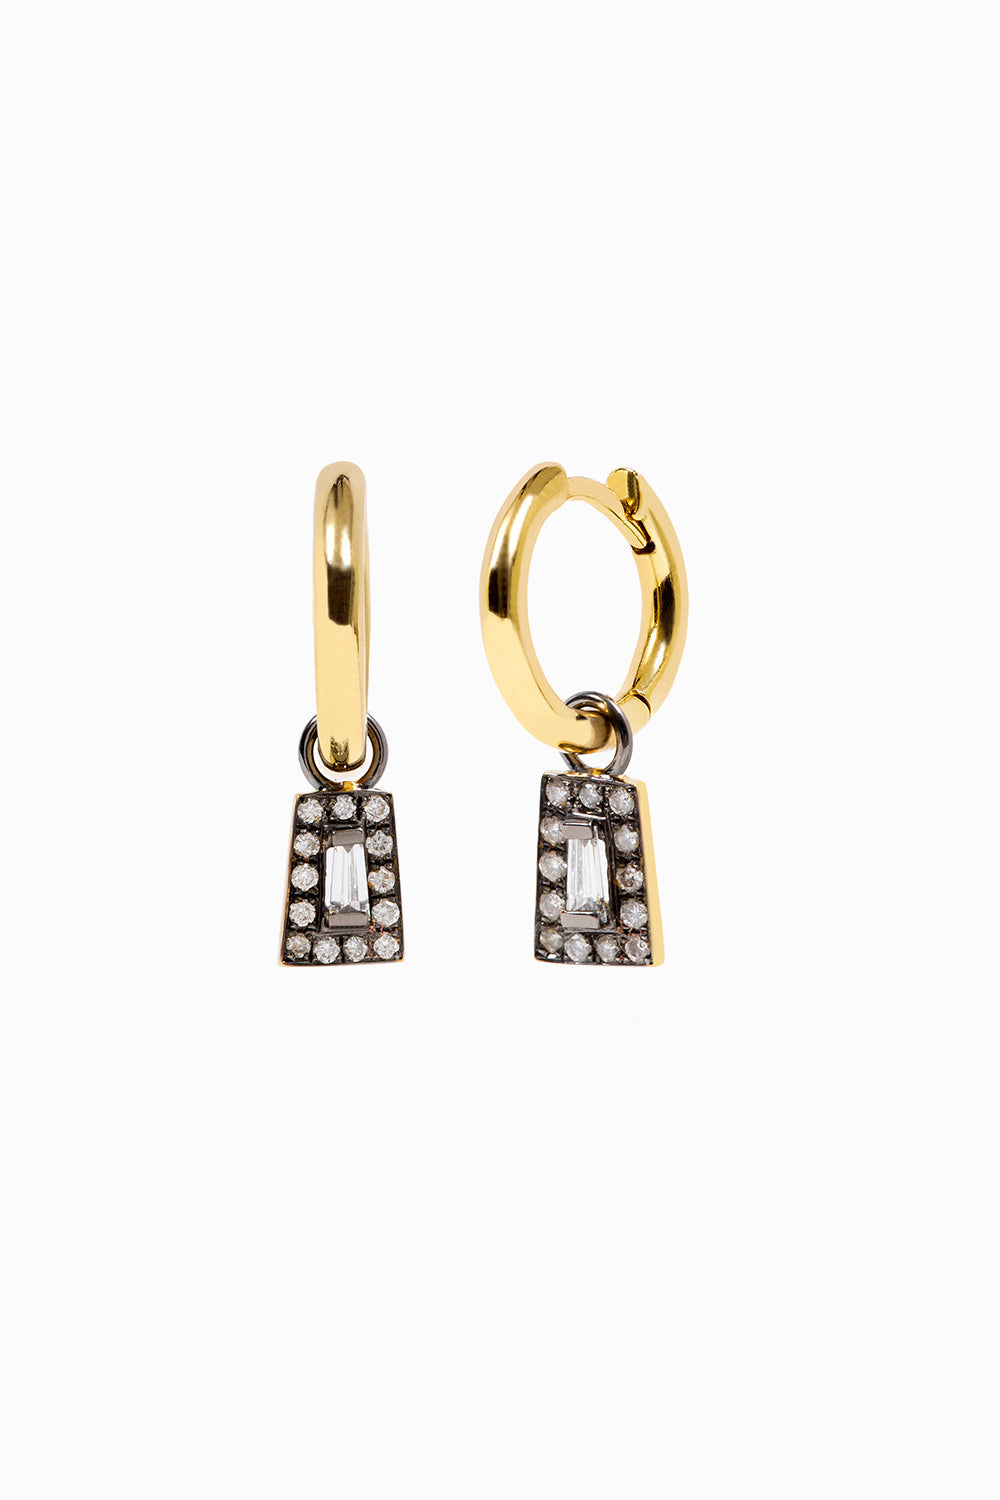 Taper earrings with black rhodium and gold hoop